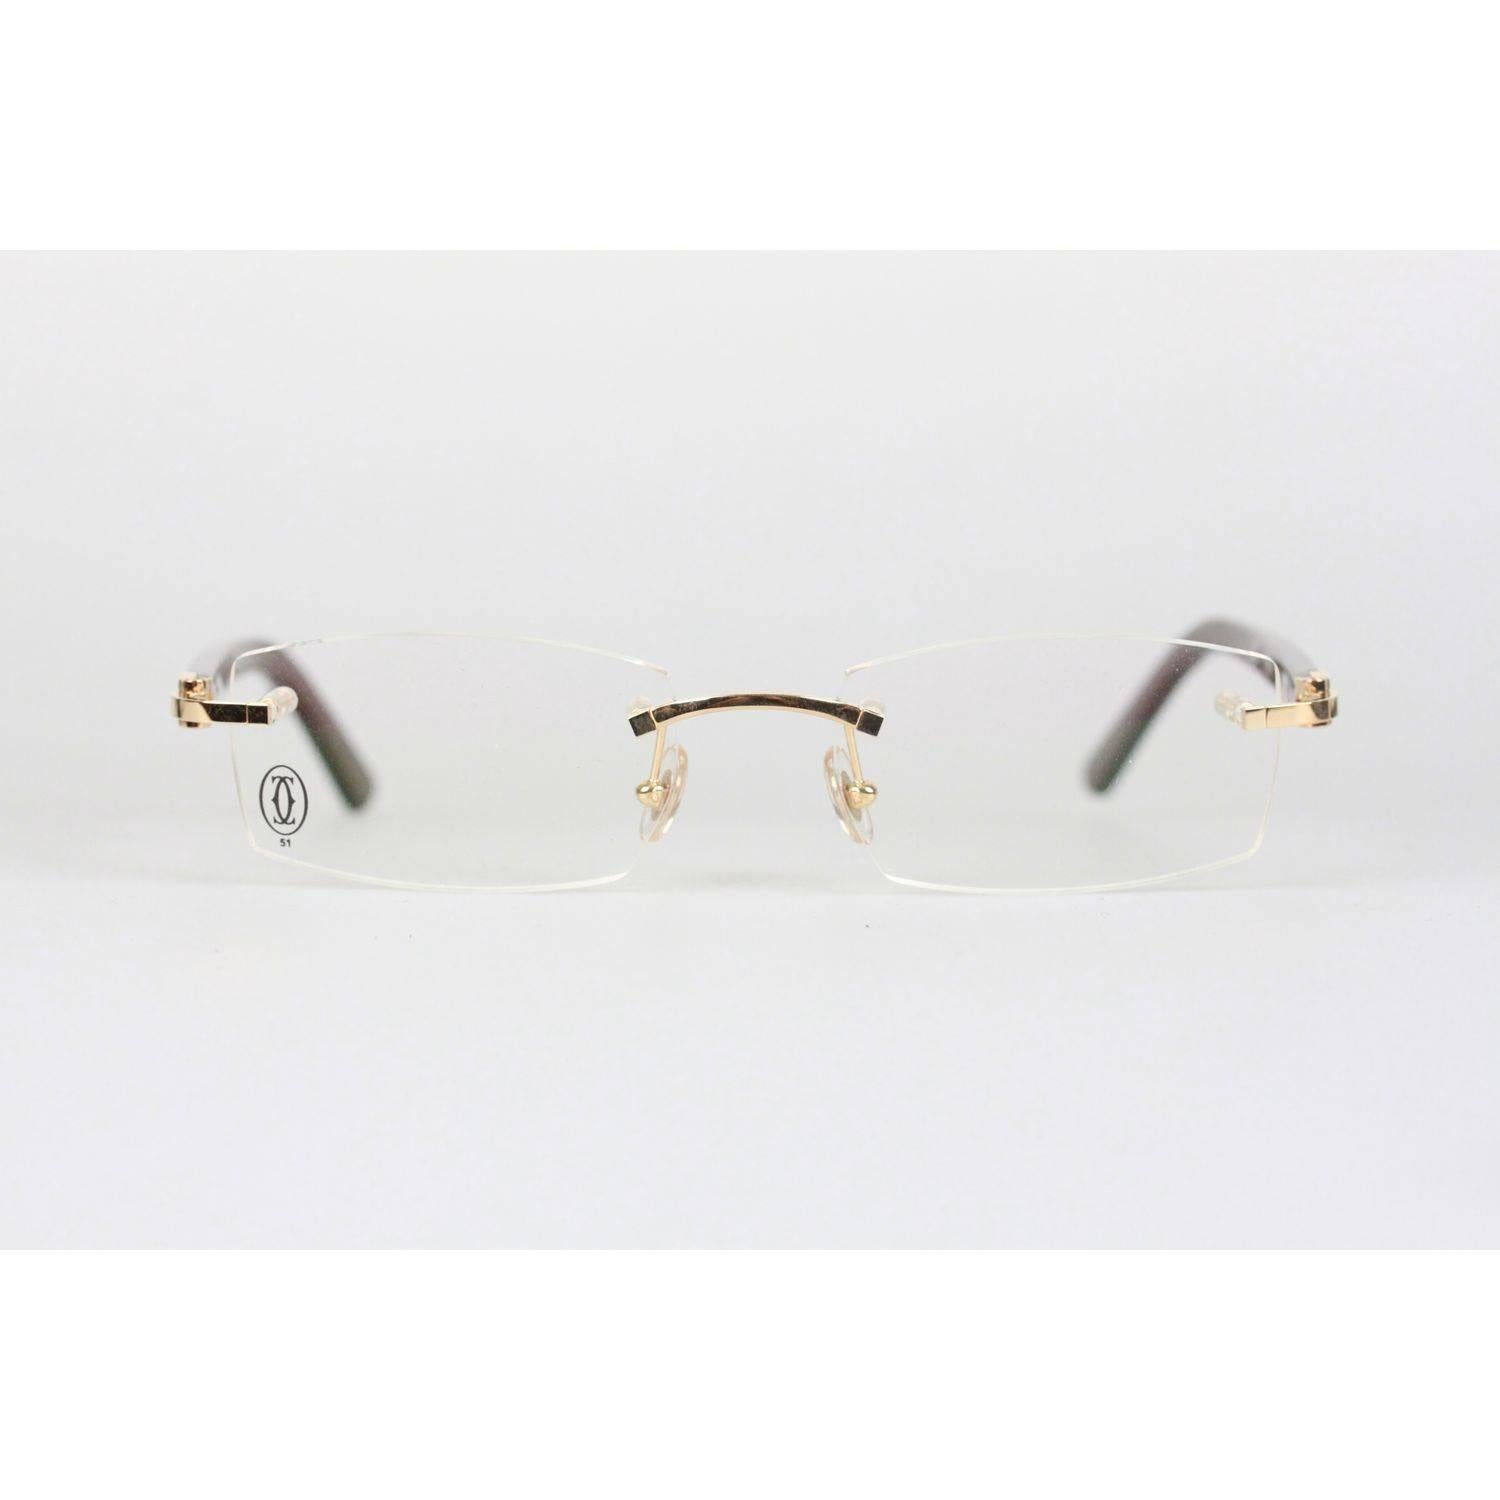 - Optical frame in brown acetate with smooth golden finish
- Rectangular rimless shape
- Flex hinges
- Comes with with original Cartier box, hardcase, cleaning cloth and booklet

Measurements:
- TEMPLE MAX. LENGTH: 140 mm
- TEMPLE TO TEMPLE - MAX